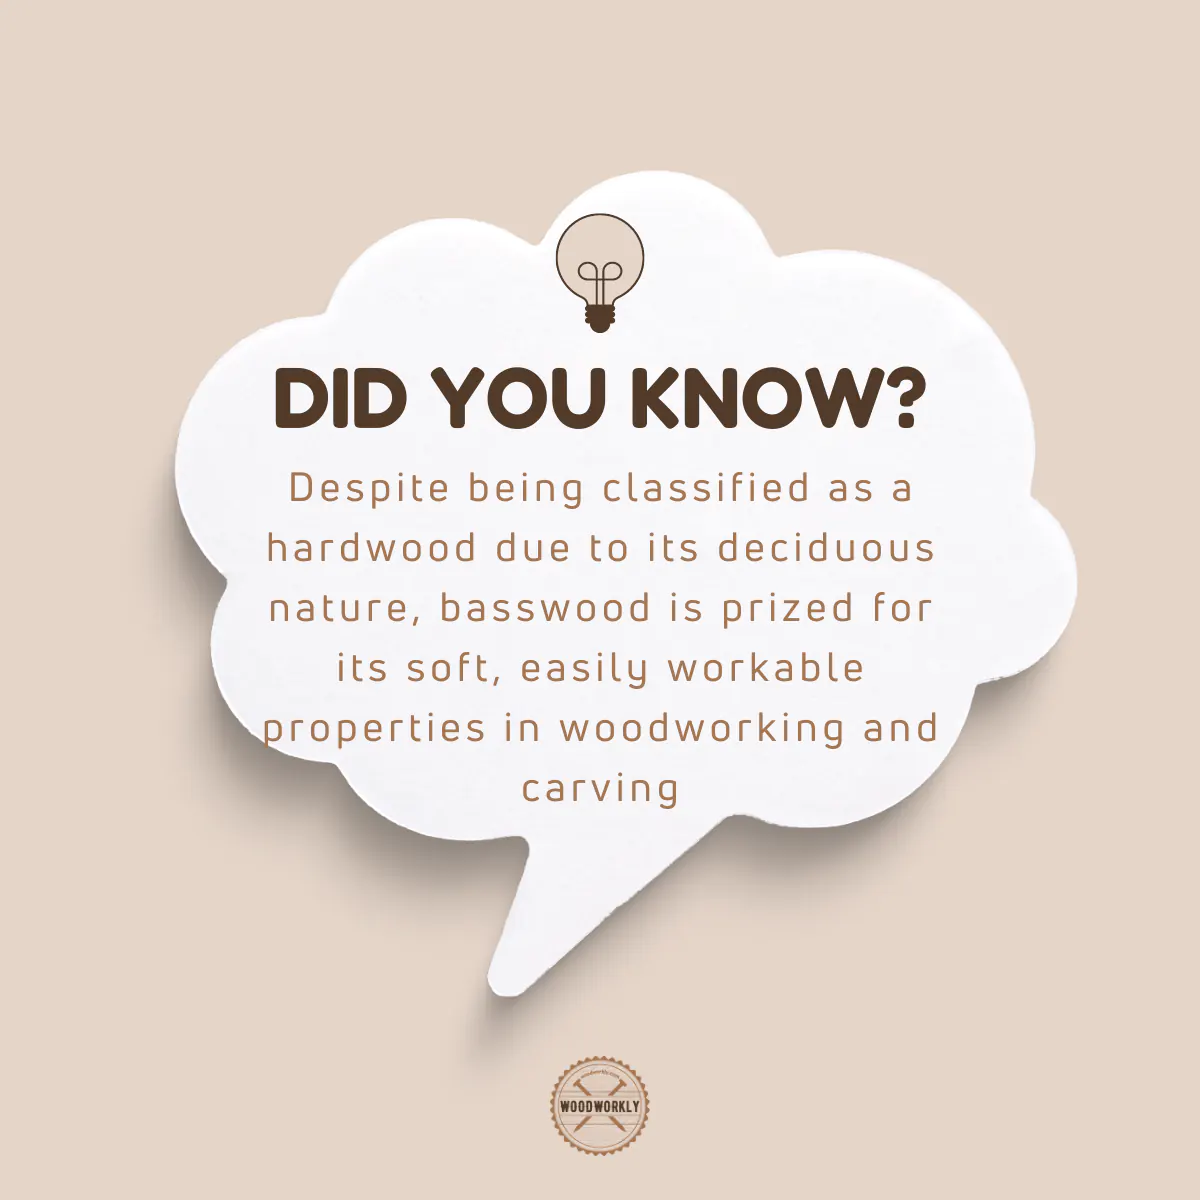 Did you Know Fact about basswood